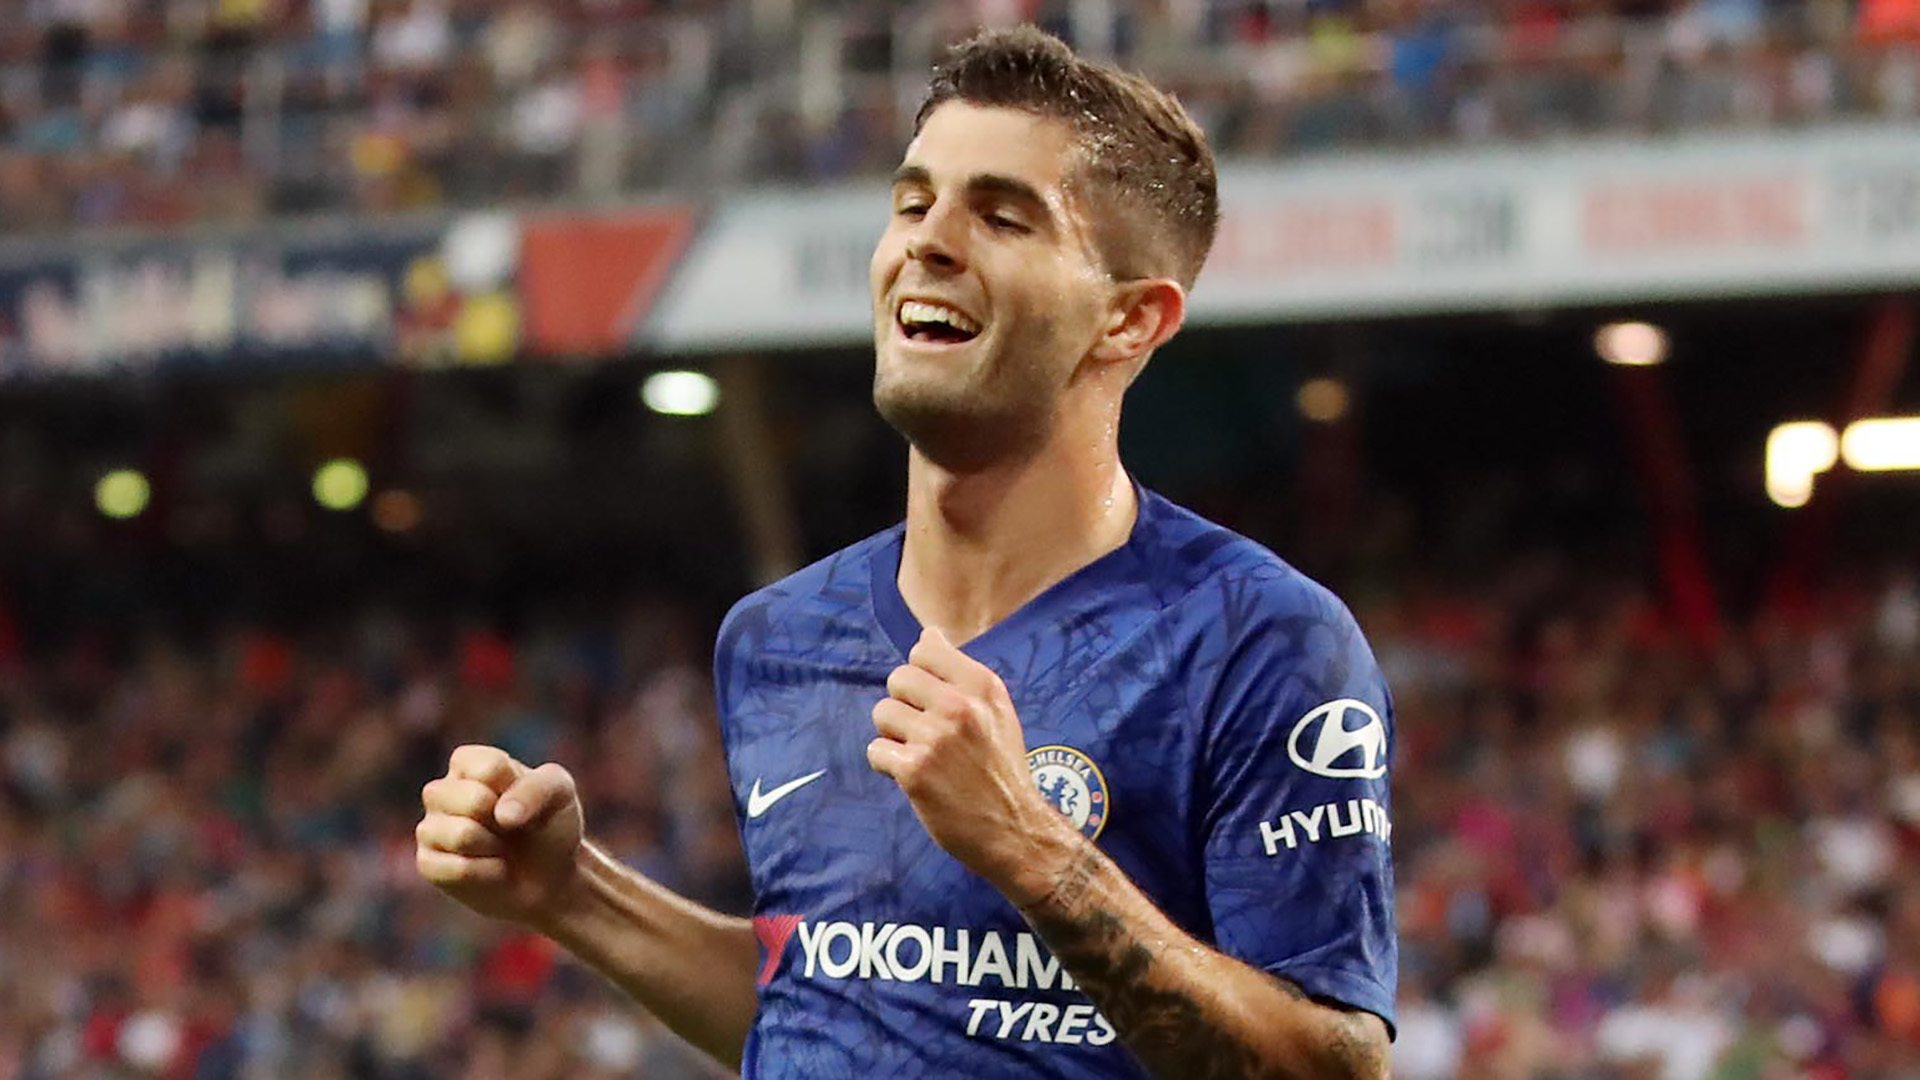 USMNT star Pulisic makes Chelsea debut as substitute against Manchester